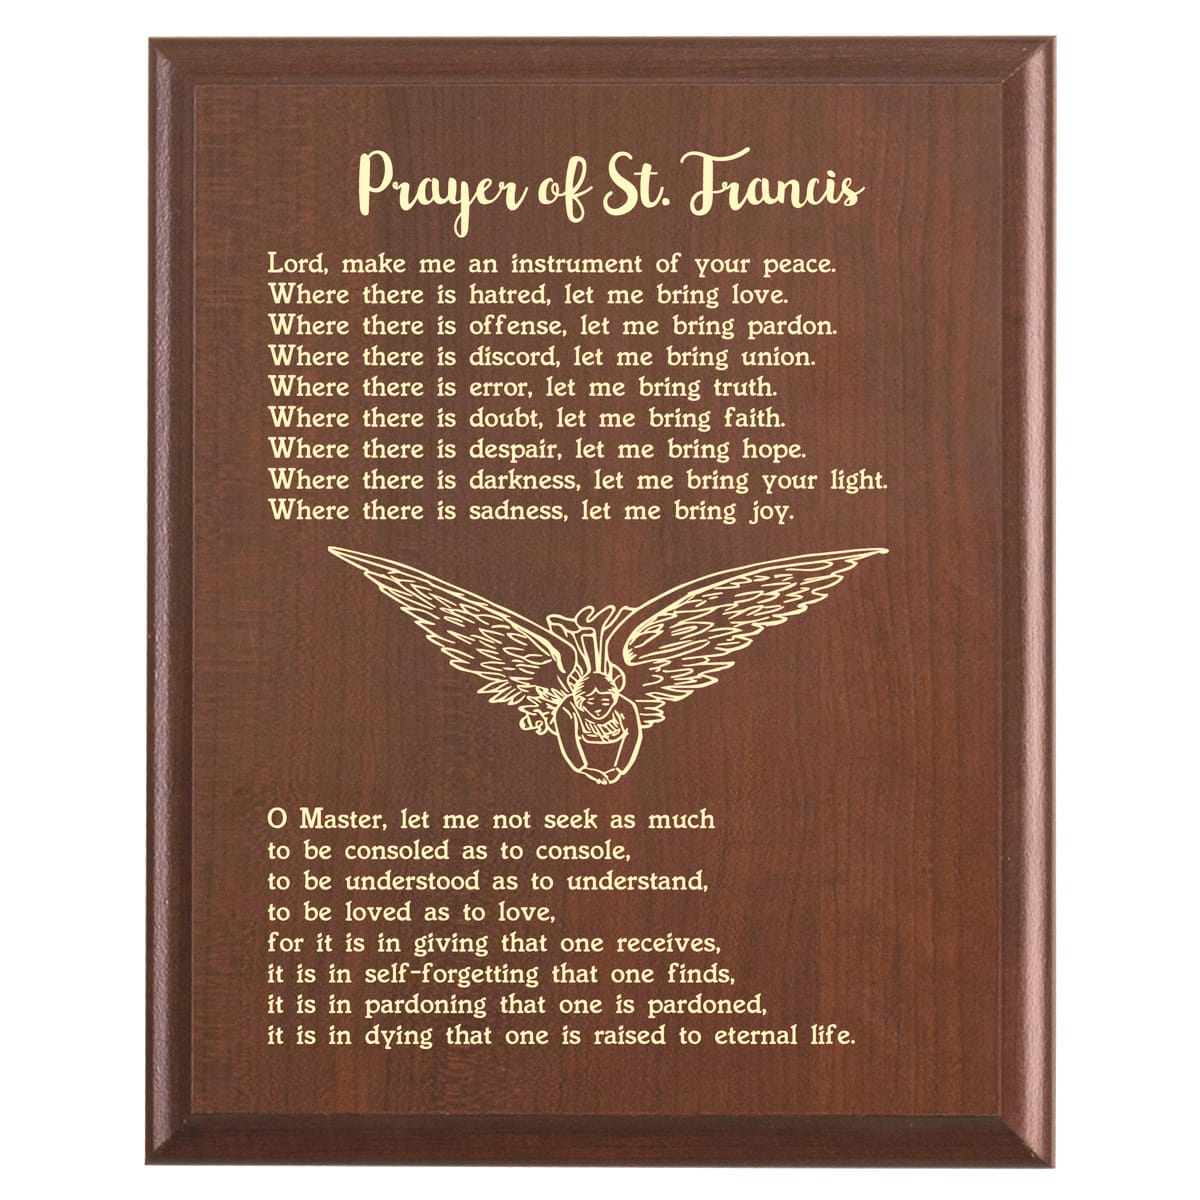 Plaque photo: St. Francis Peace Prayer Plaque design with free personalization. Wood style finish with customized text.